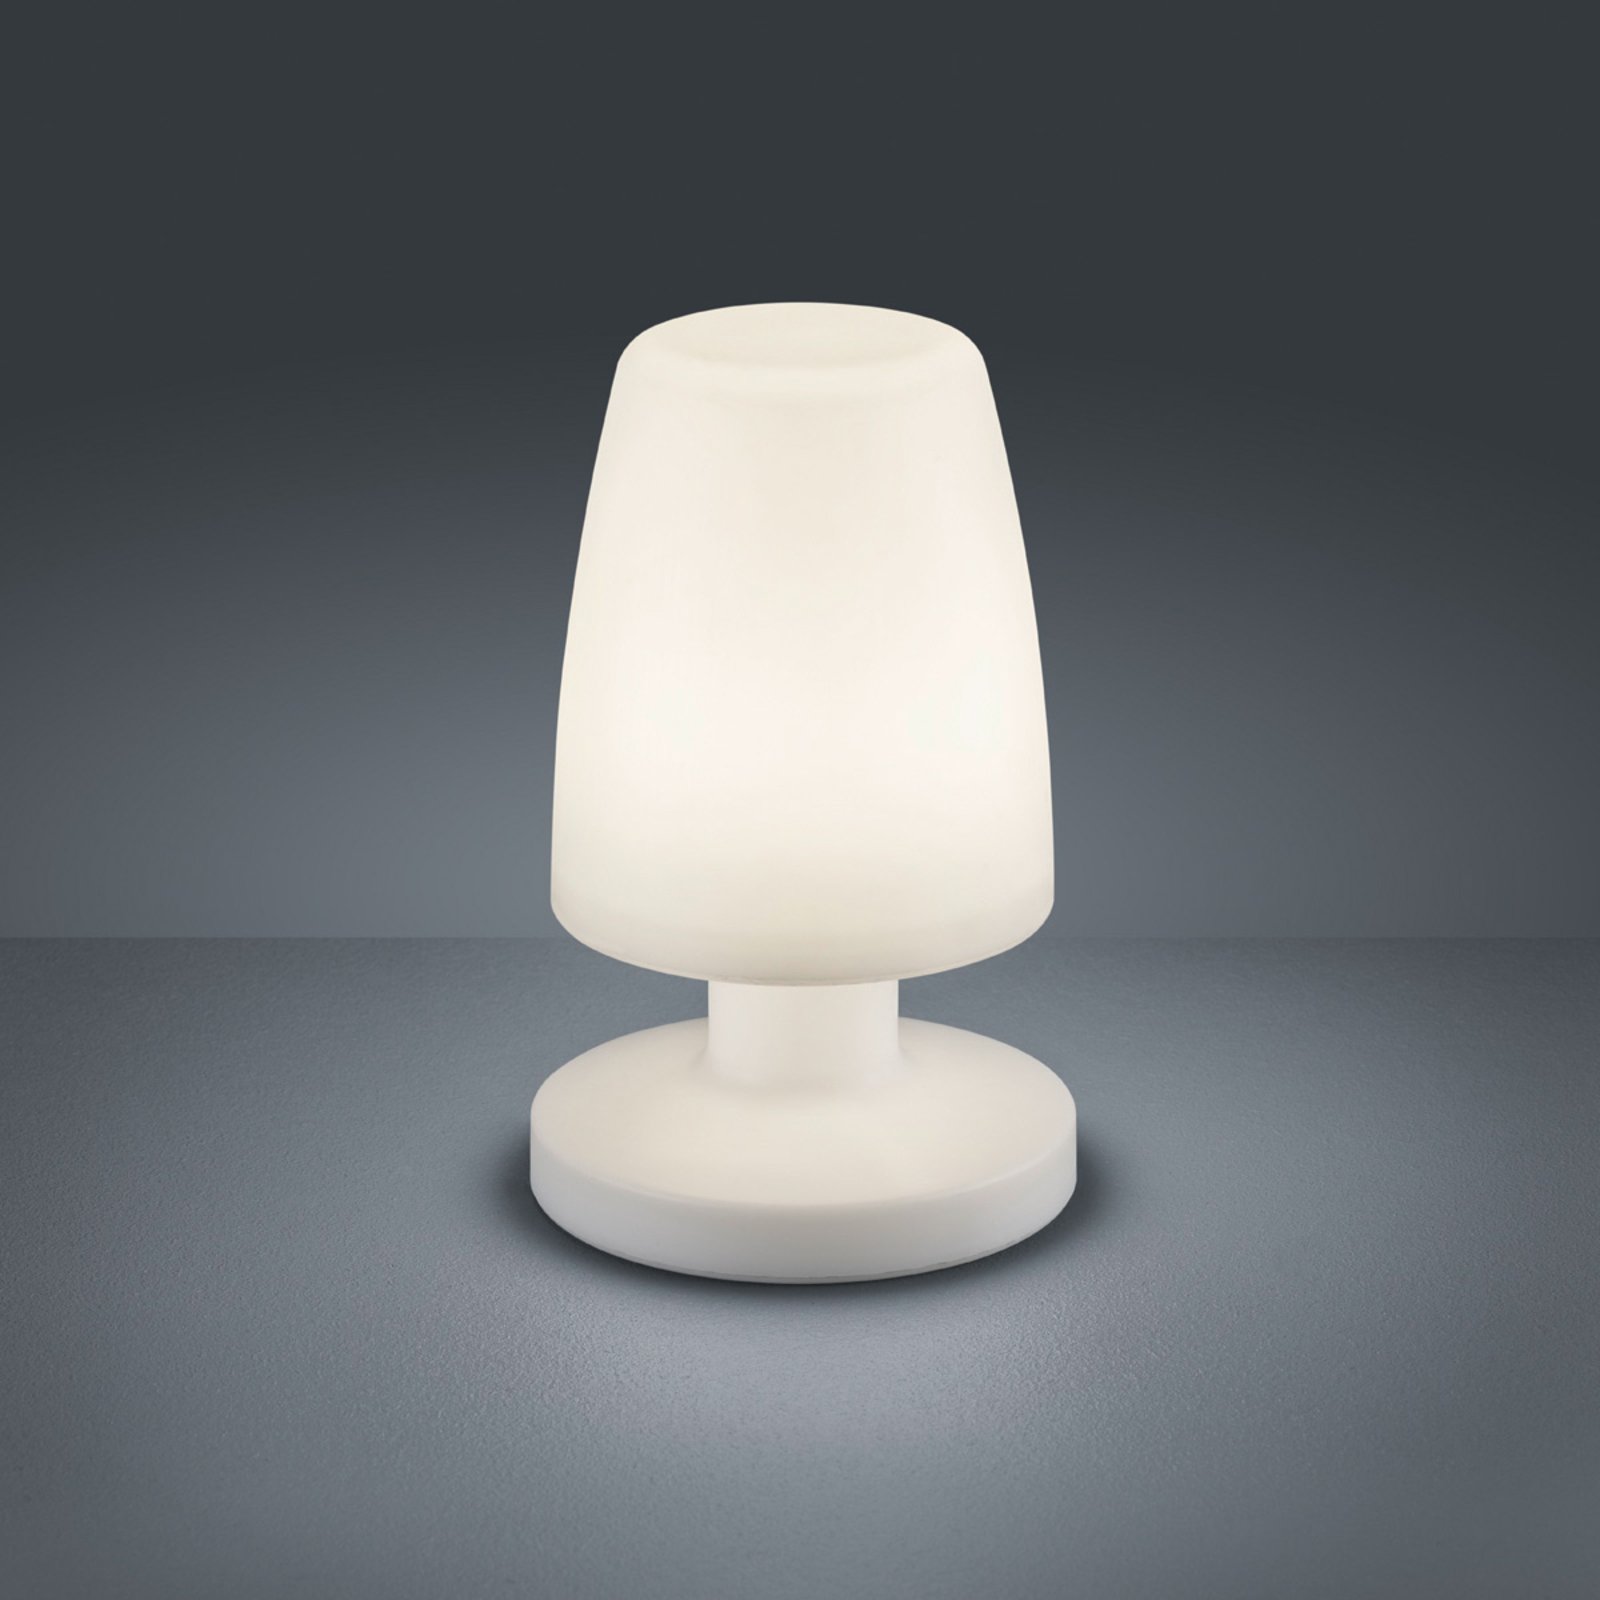 Dora LED table lamp, battery-powered, for outdoors